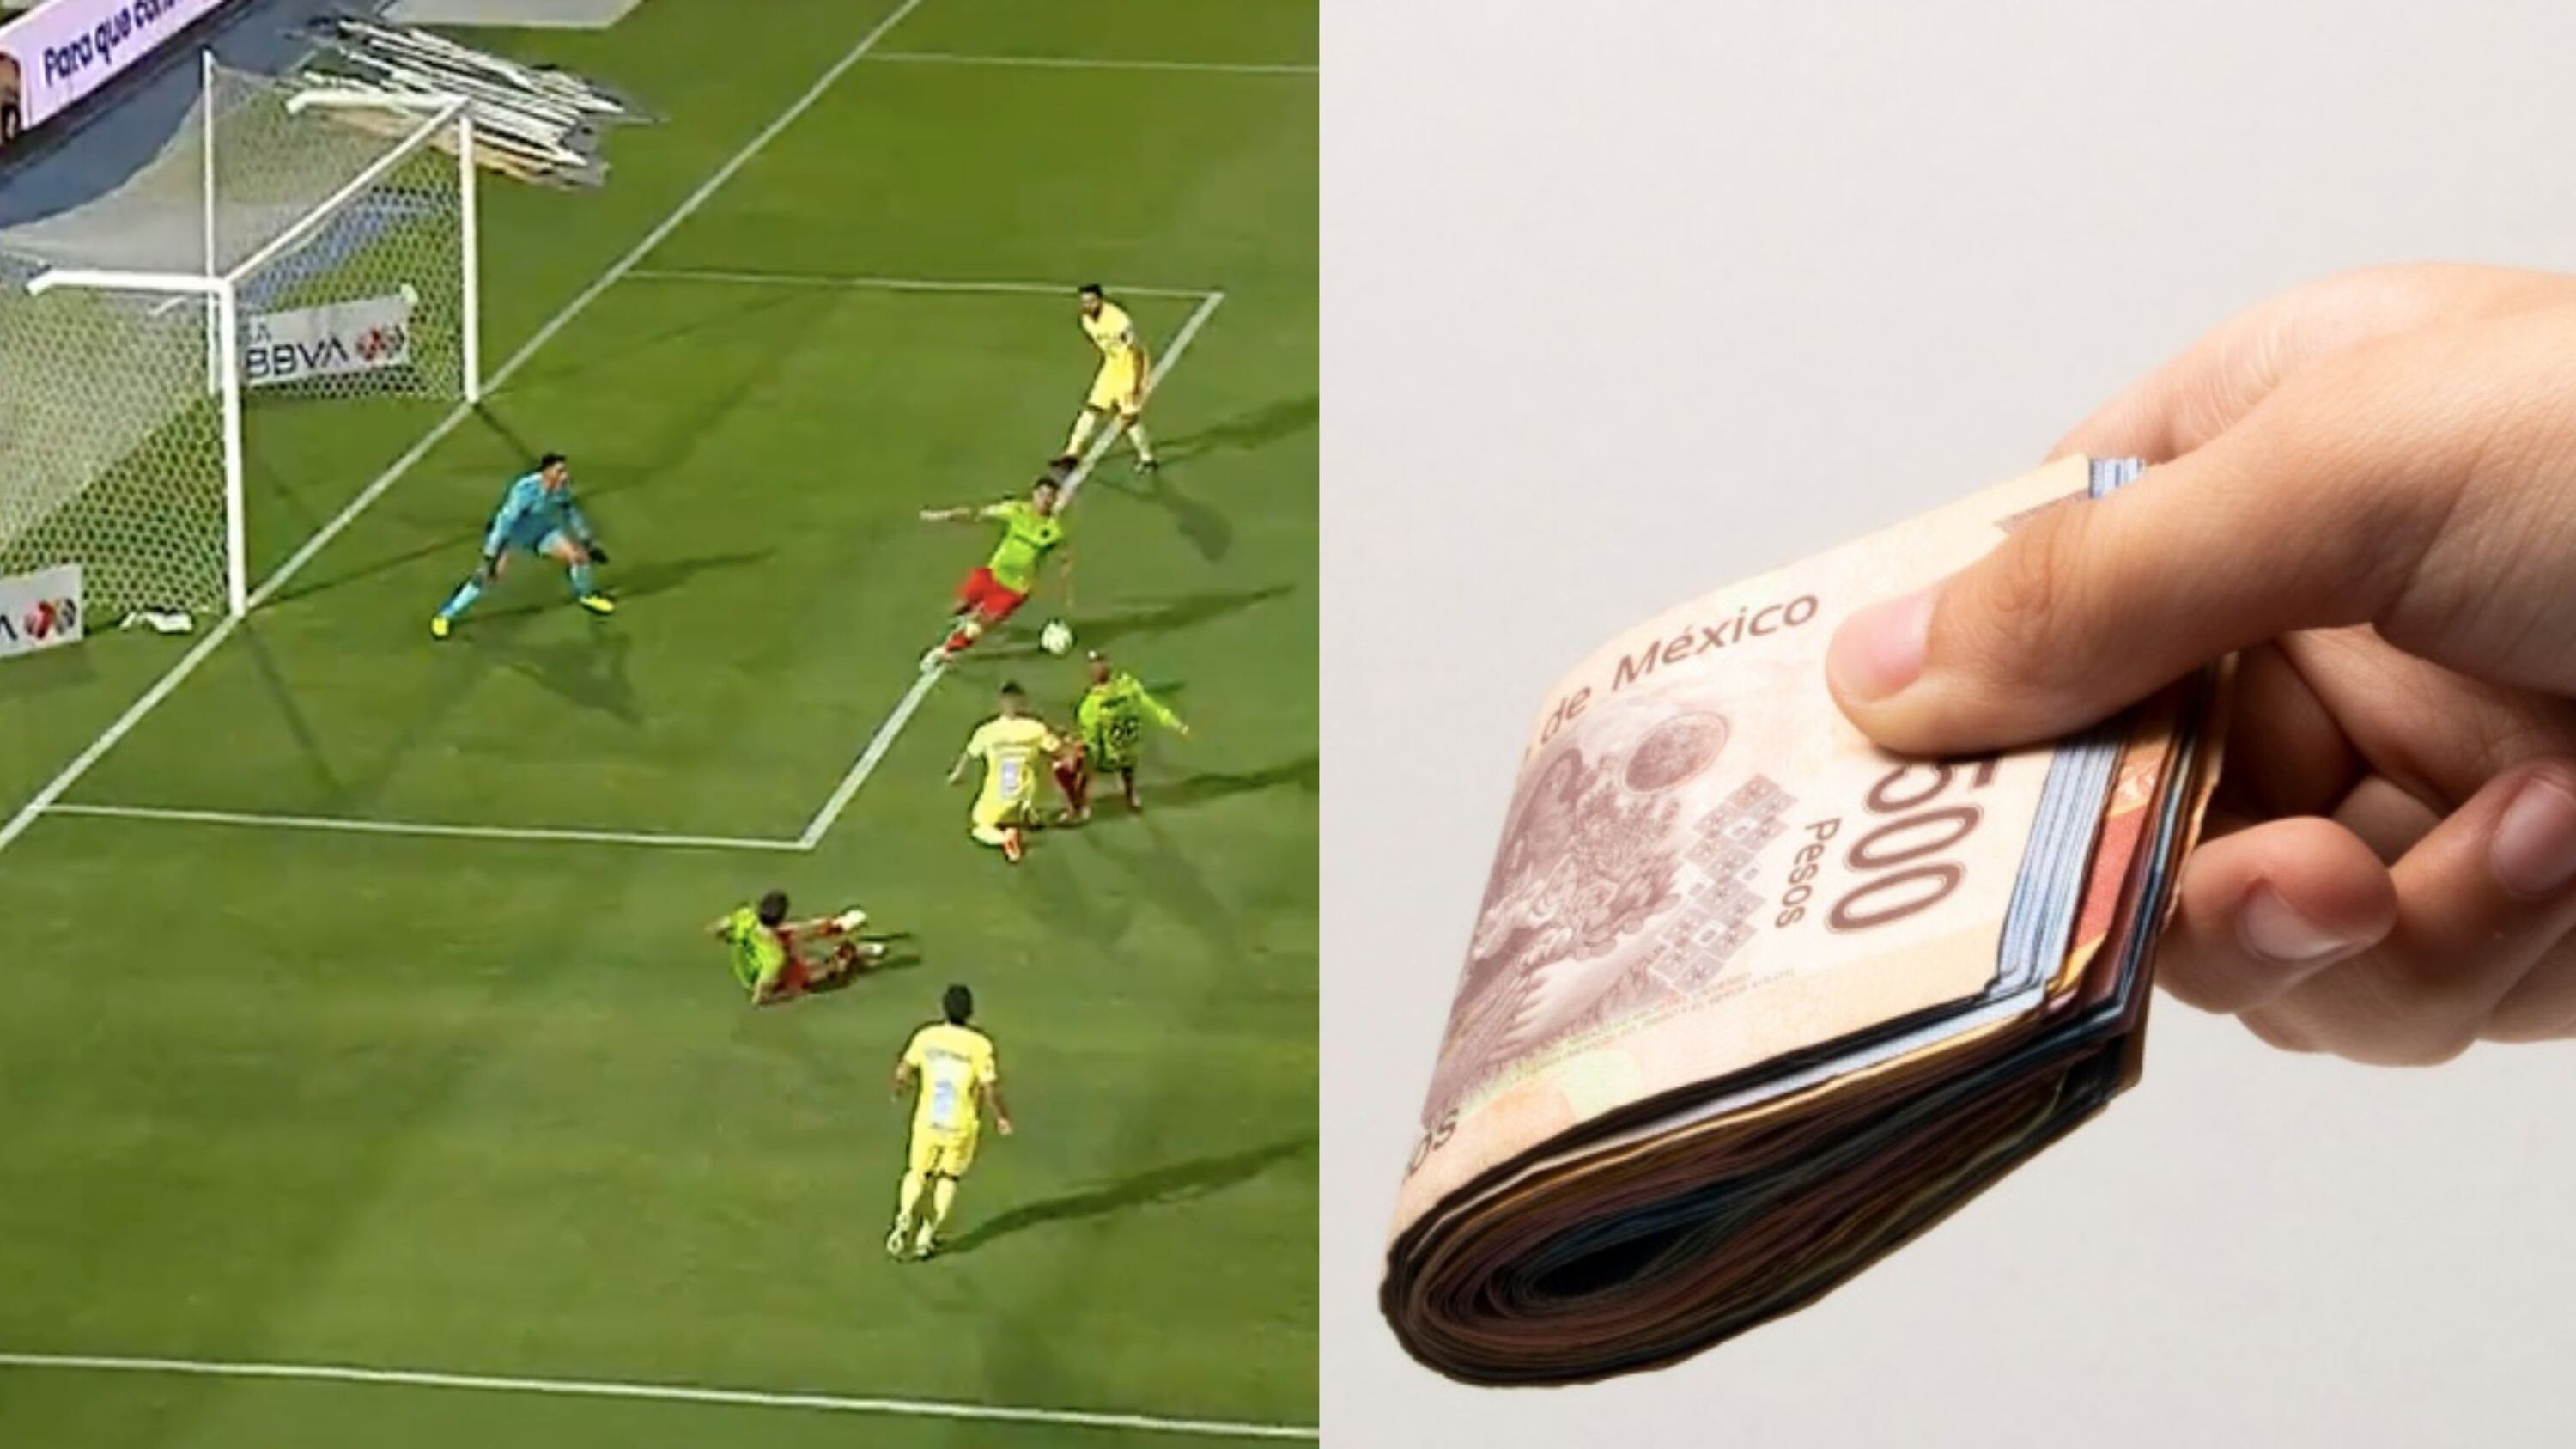 The amount of money the referee received to prevent Henry Martin's goal against FC Juárez